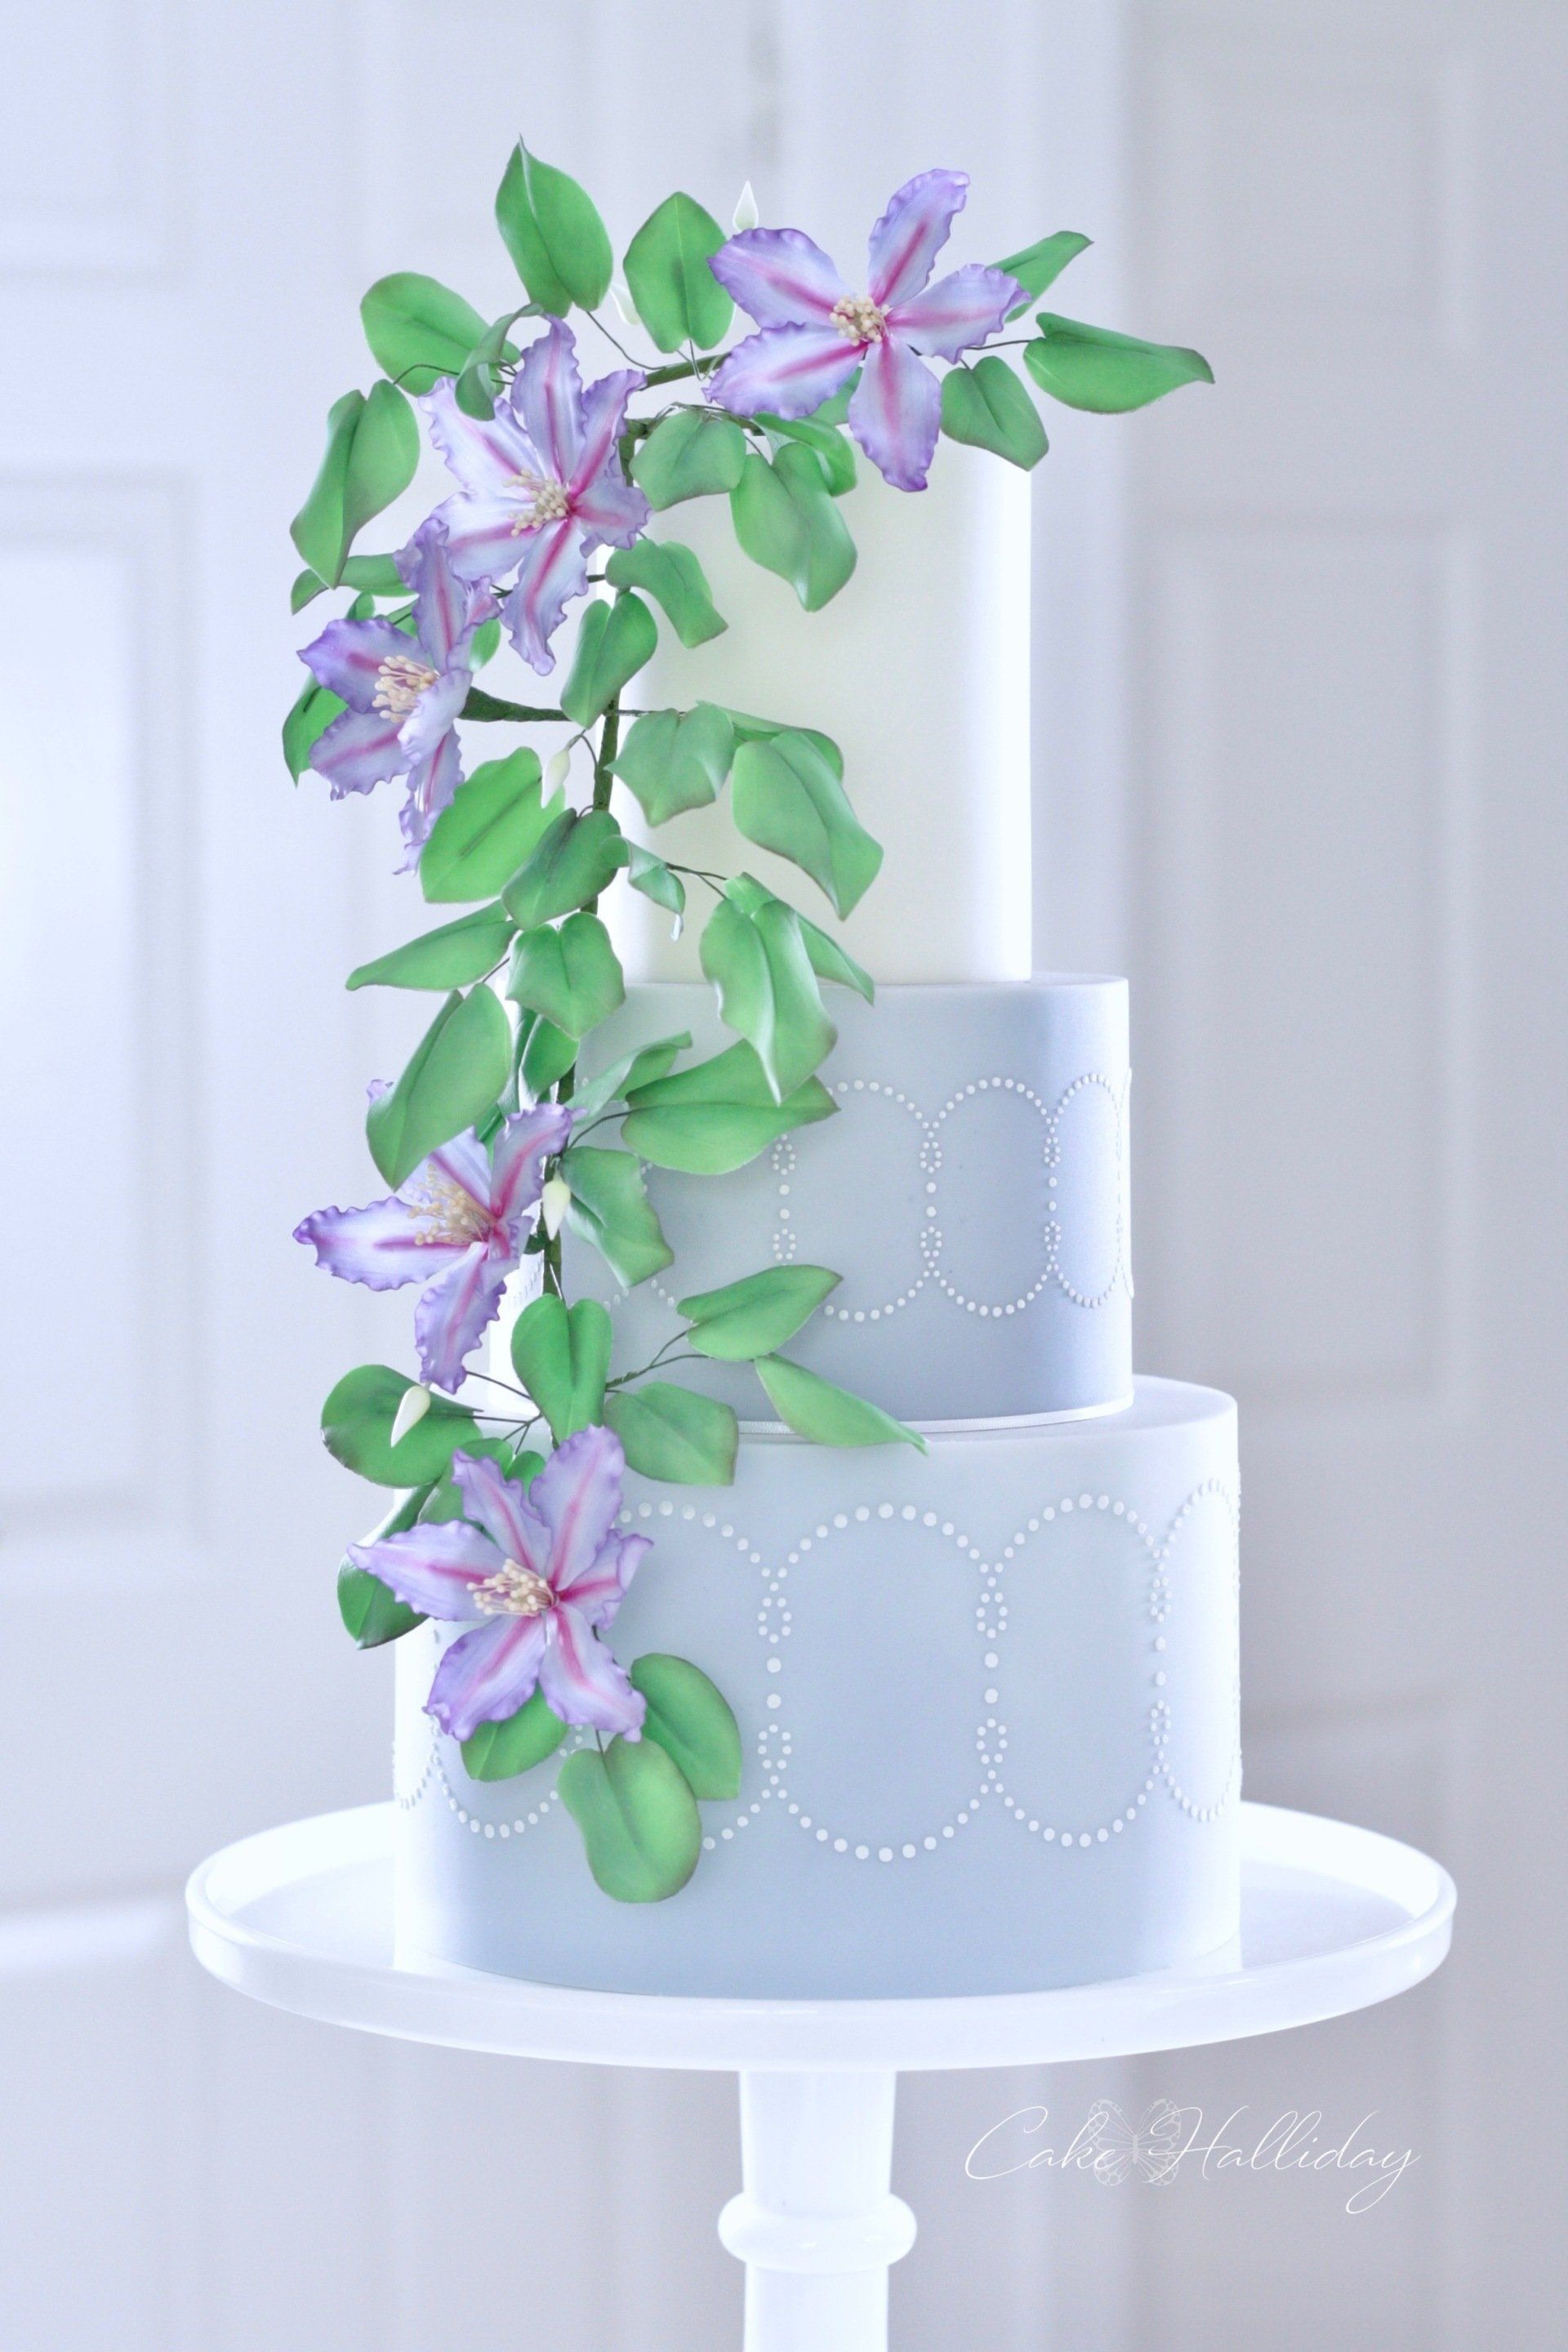 Three tier wedding cake with purple clematis and stencilling